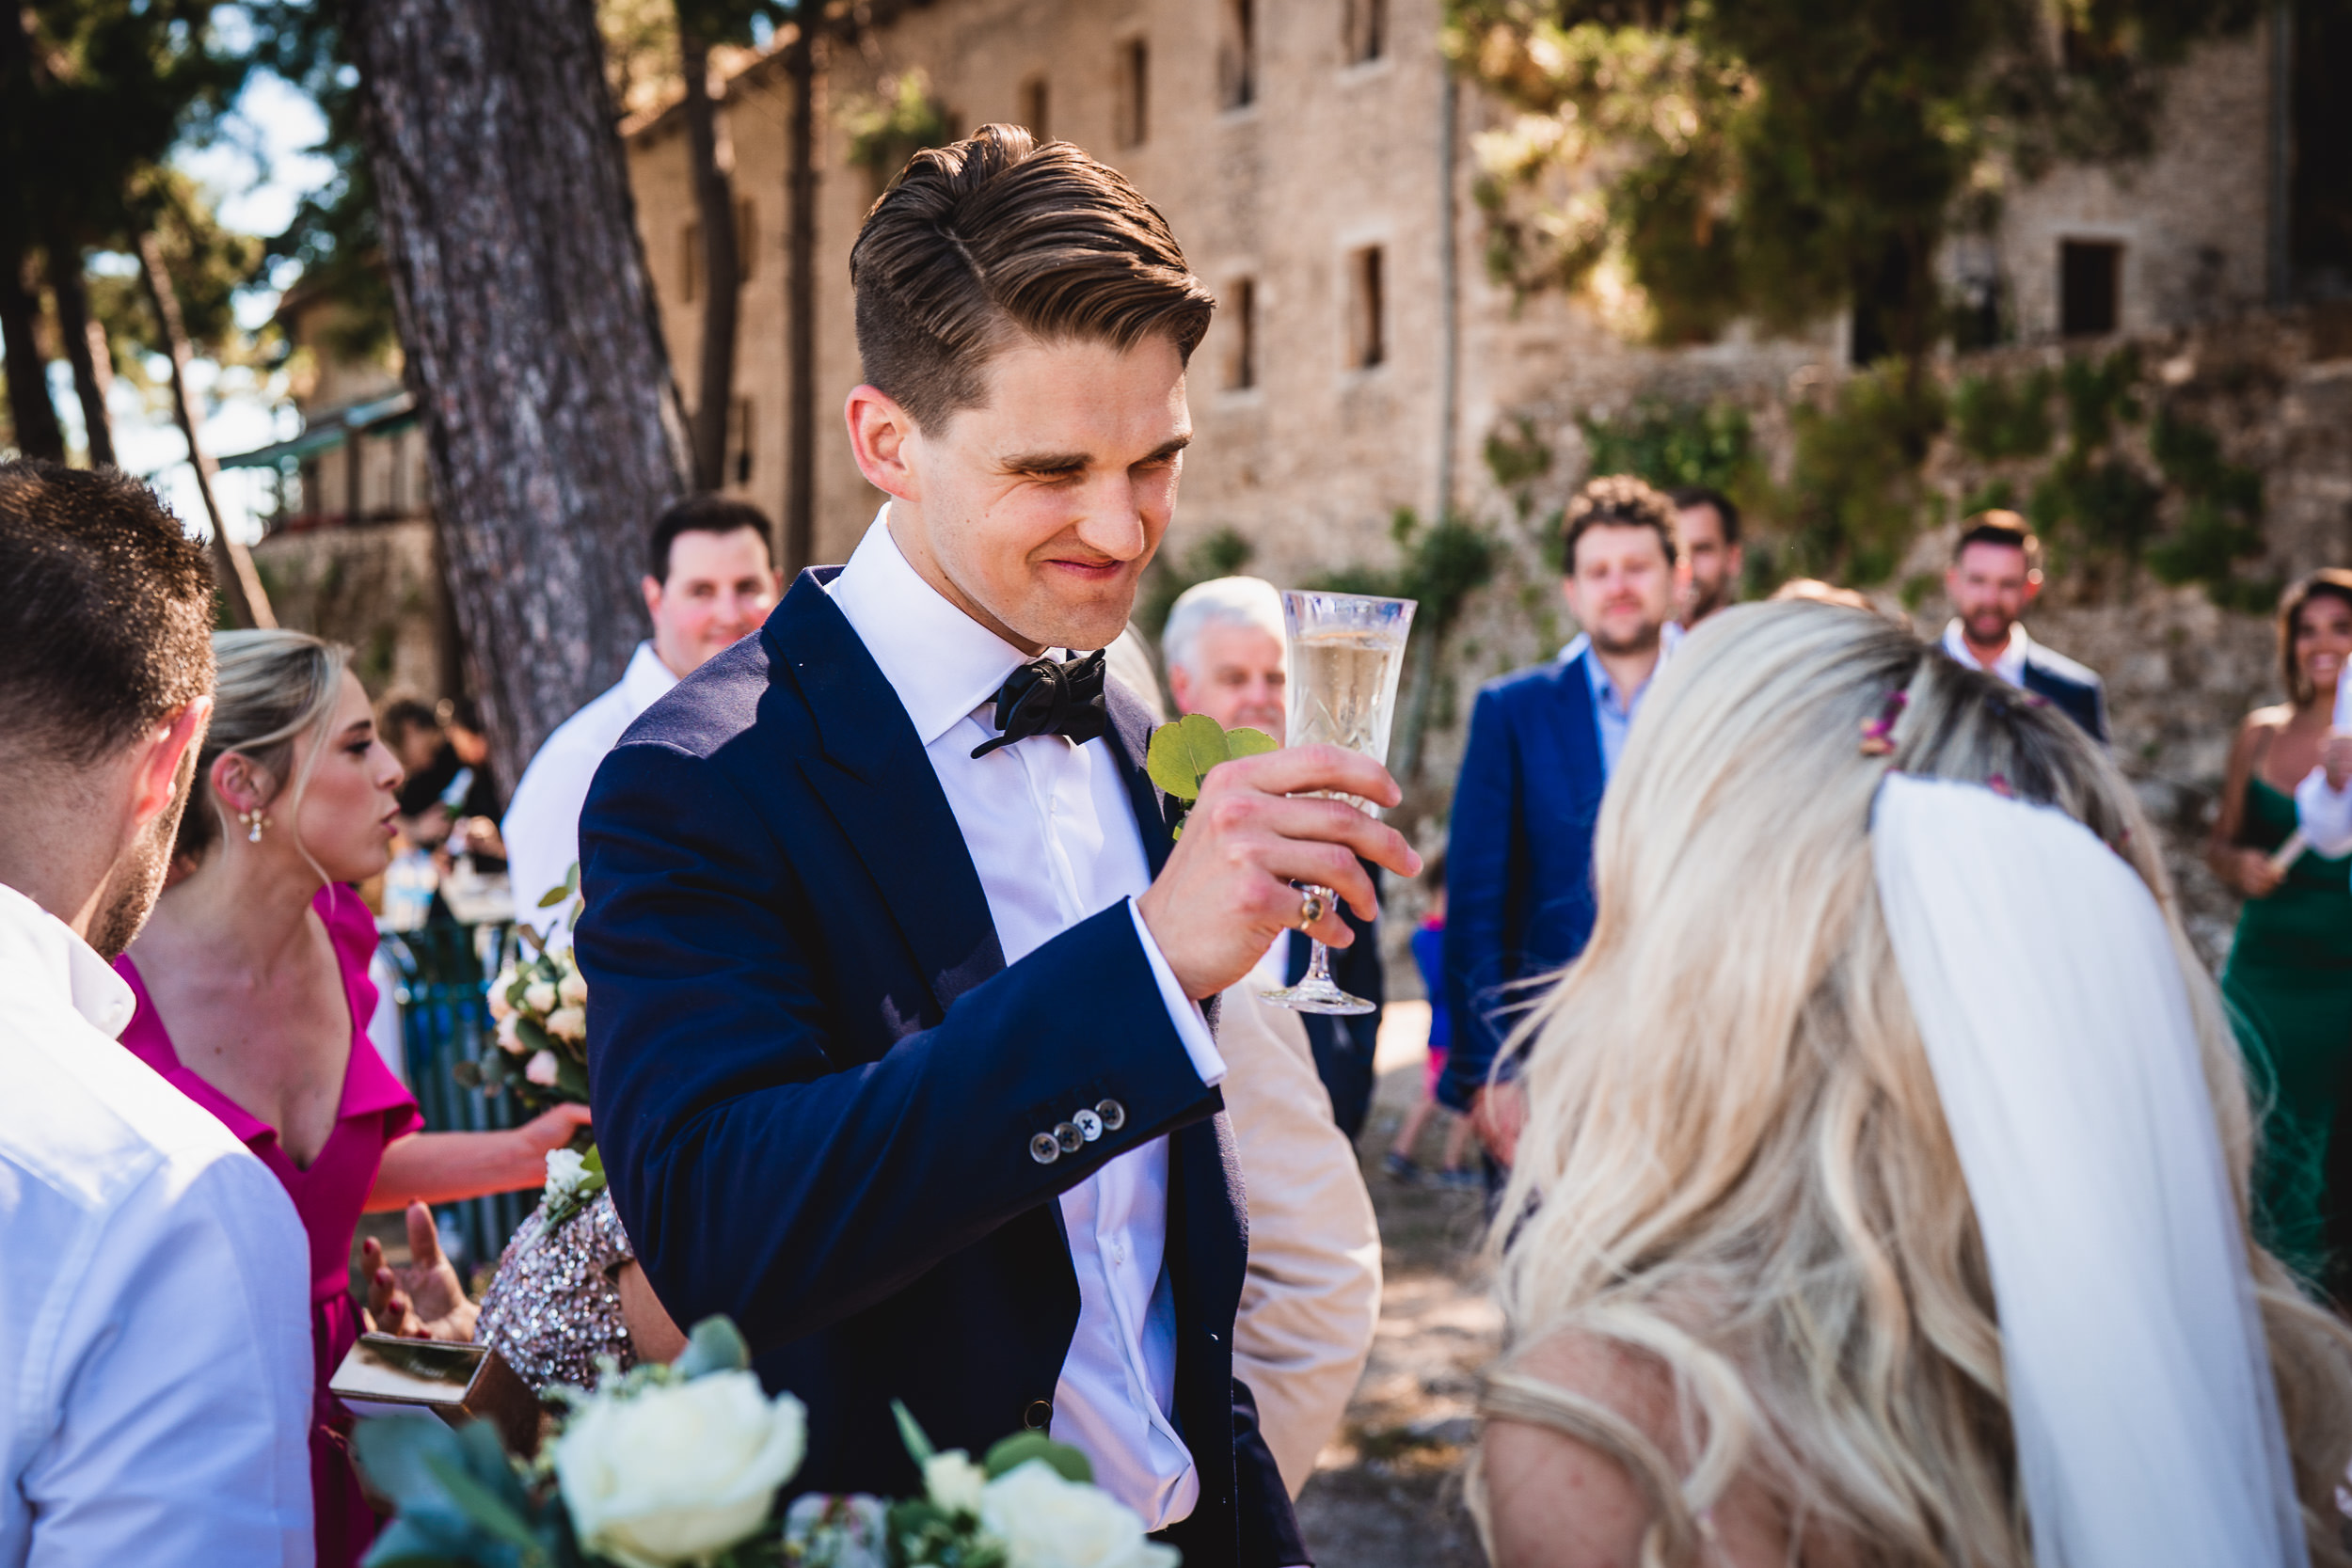 A groom raising a glass of wine in a wedding photo.